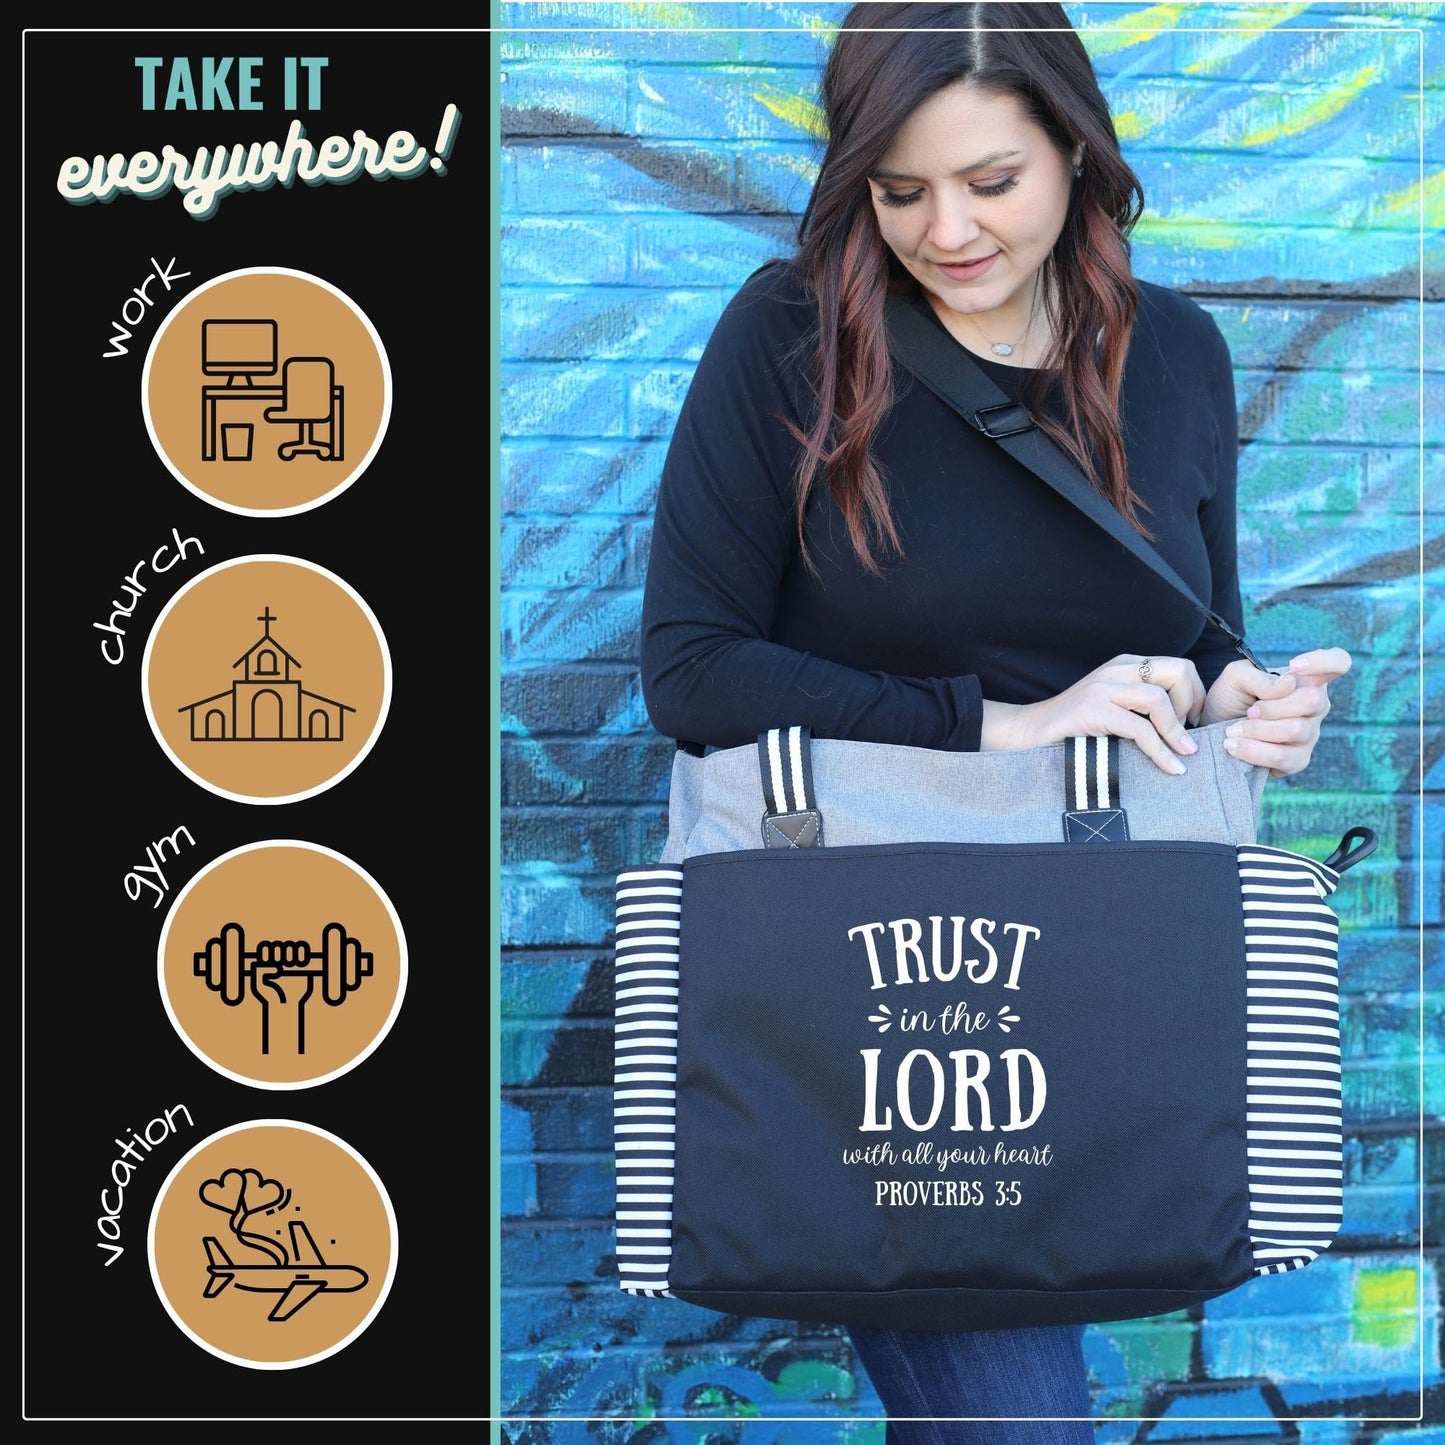 Large Zippered Inspirational Tote Bags for Women - Christian Gift Ideas (Trust in the Lord Lou Lou Gray)